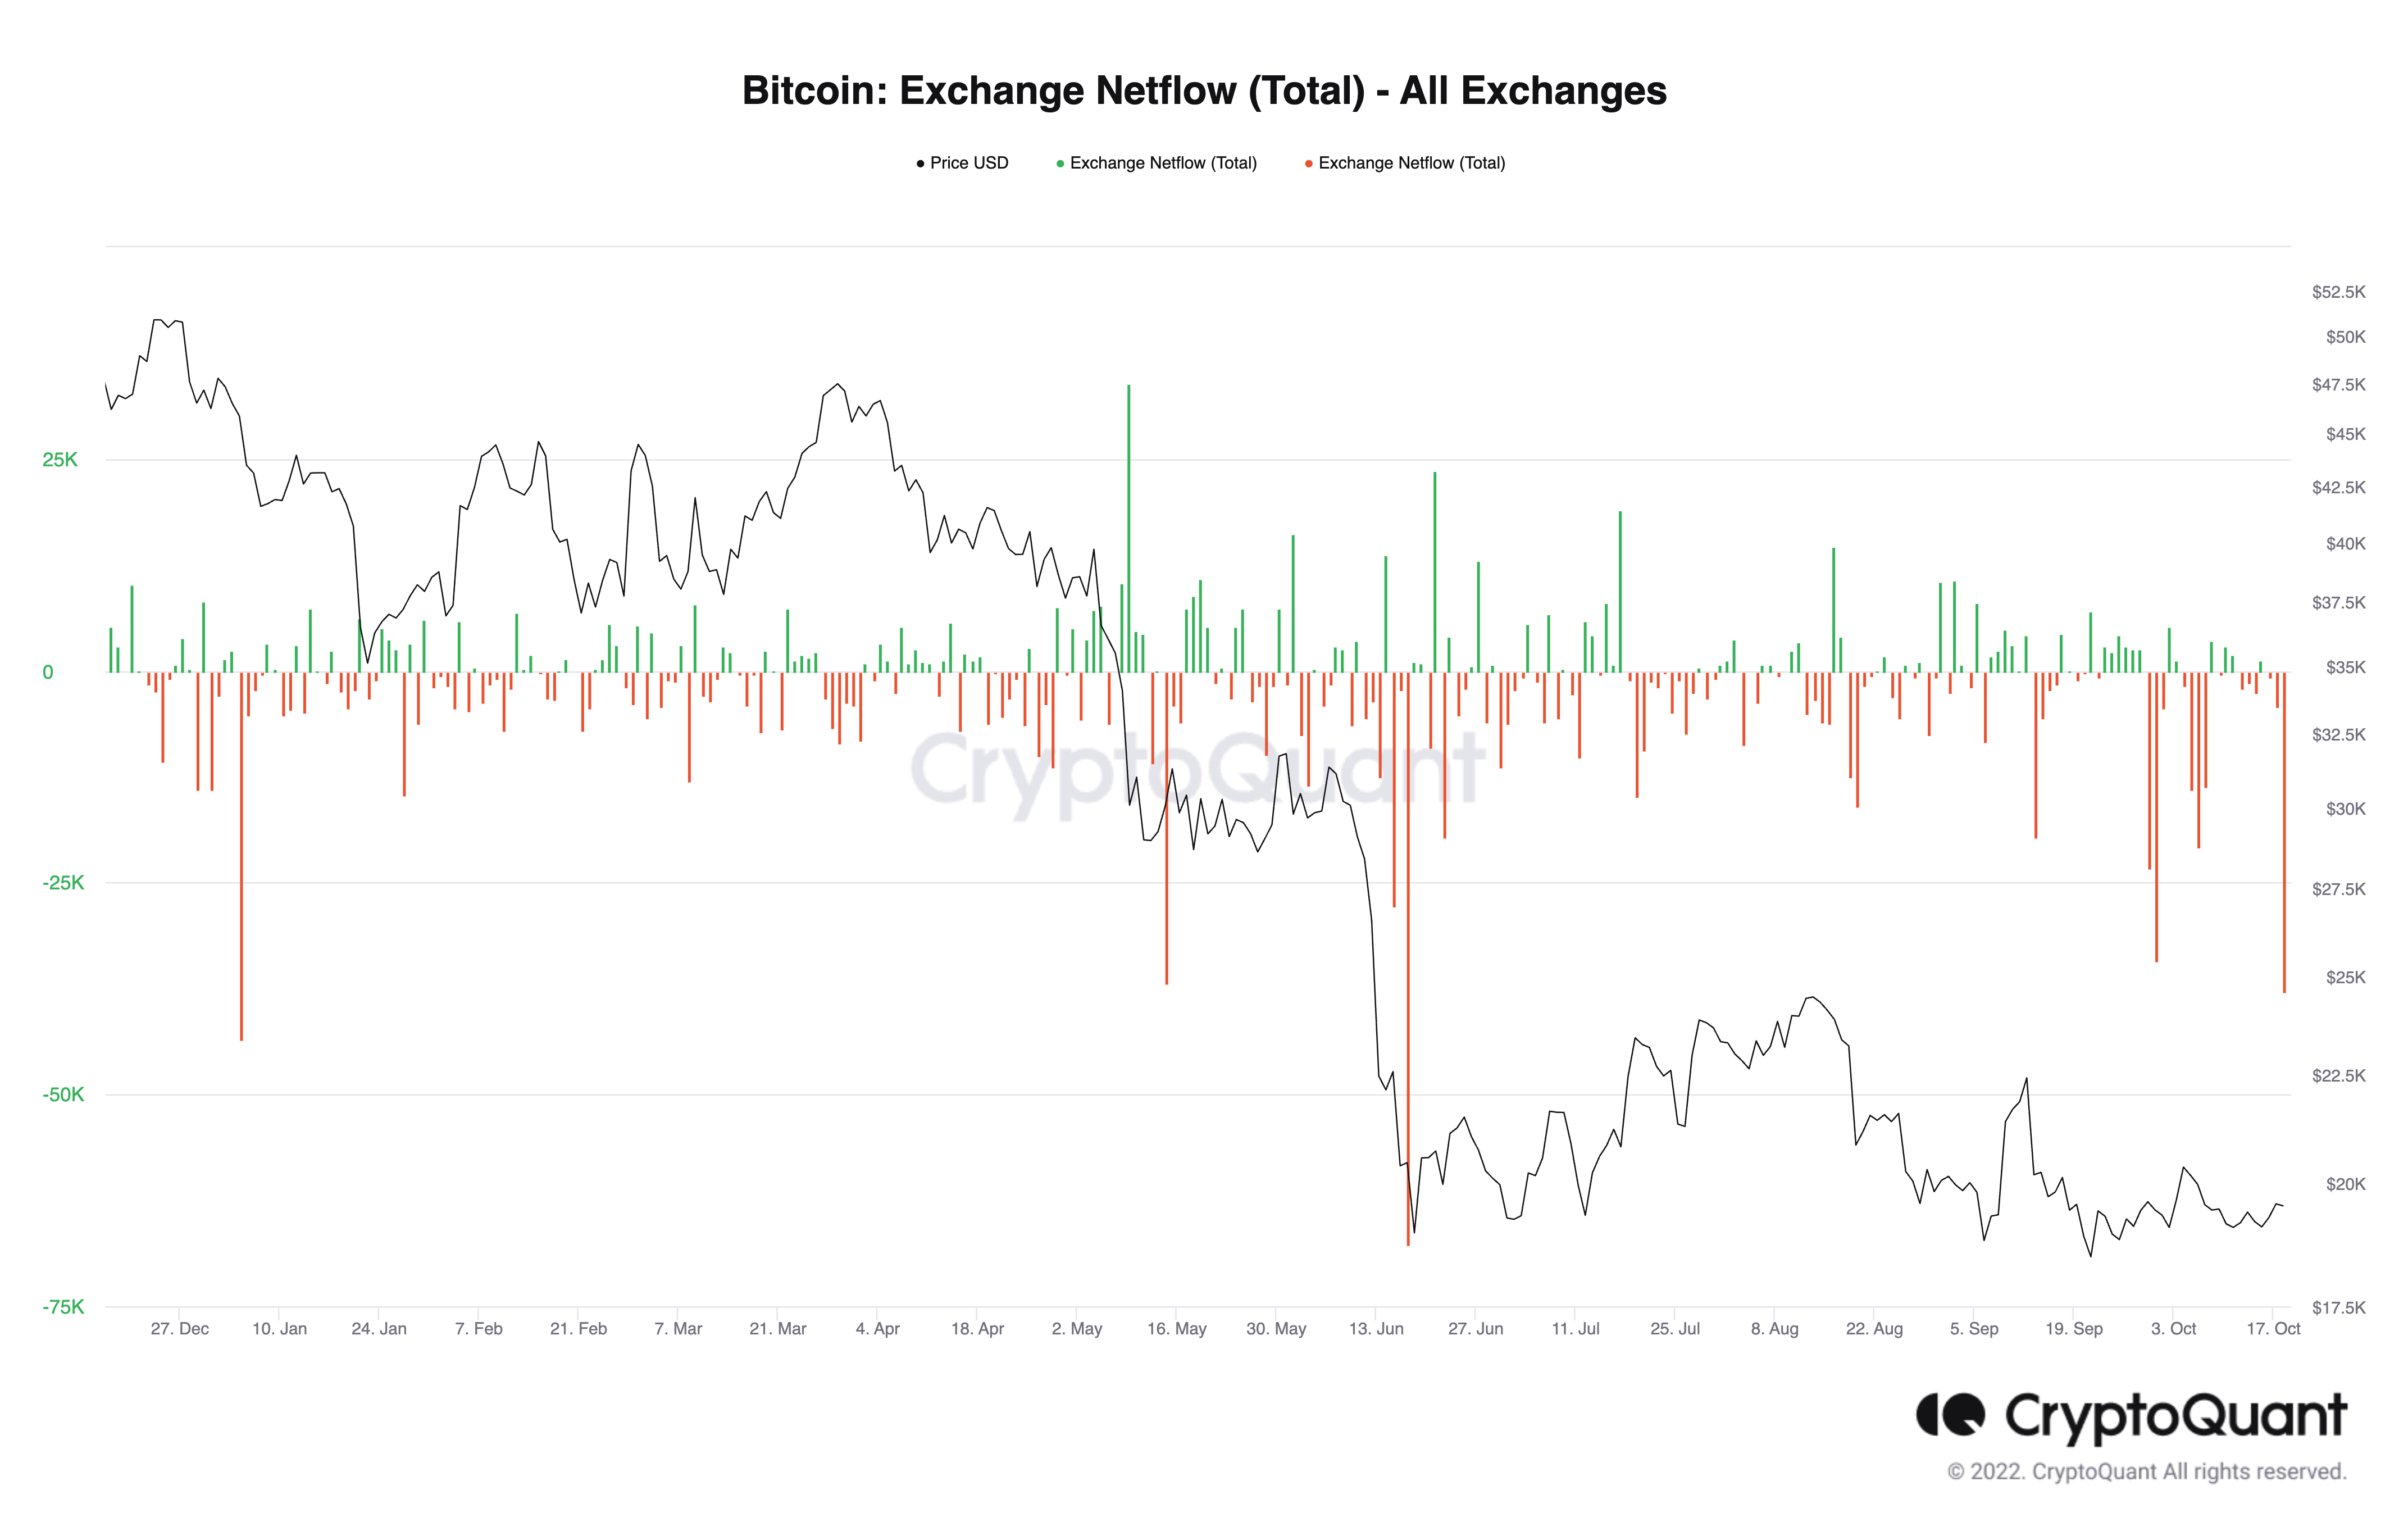 740M in Bitcoin exits exchanges the biggest outflow since Junes